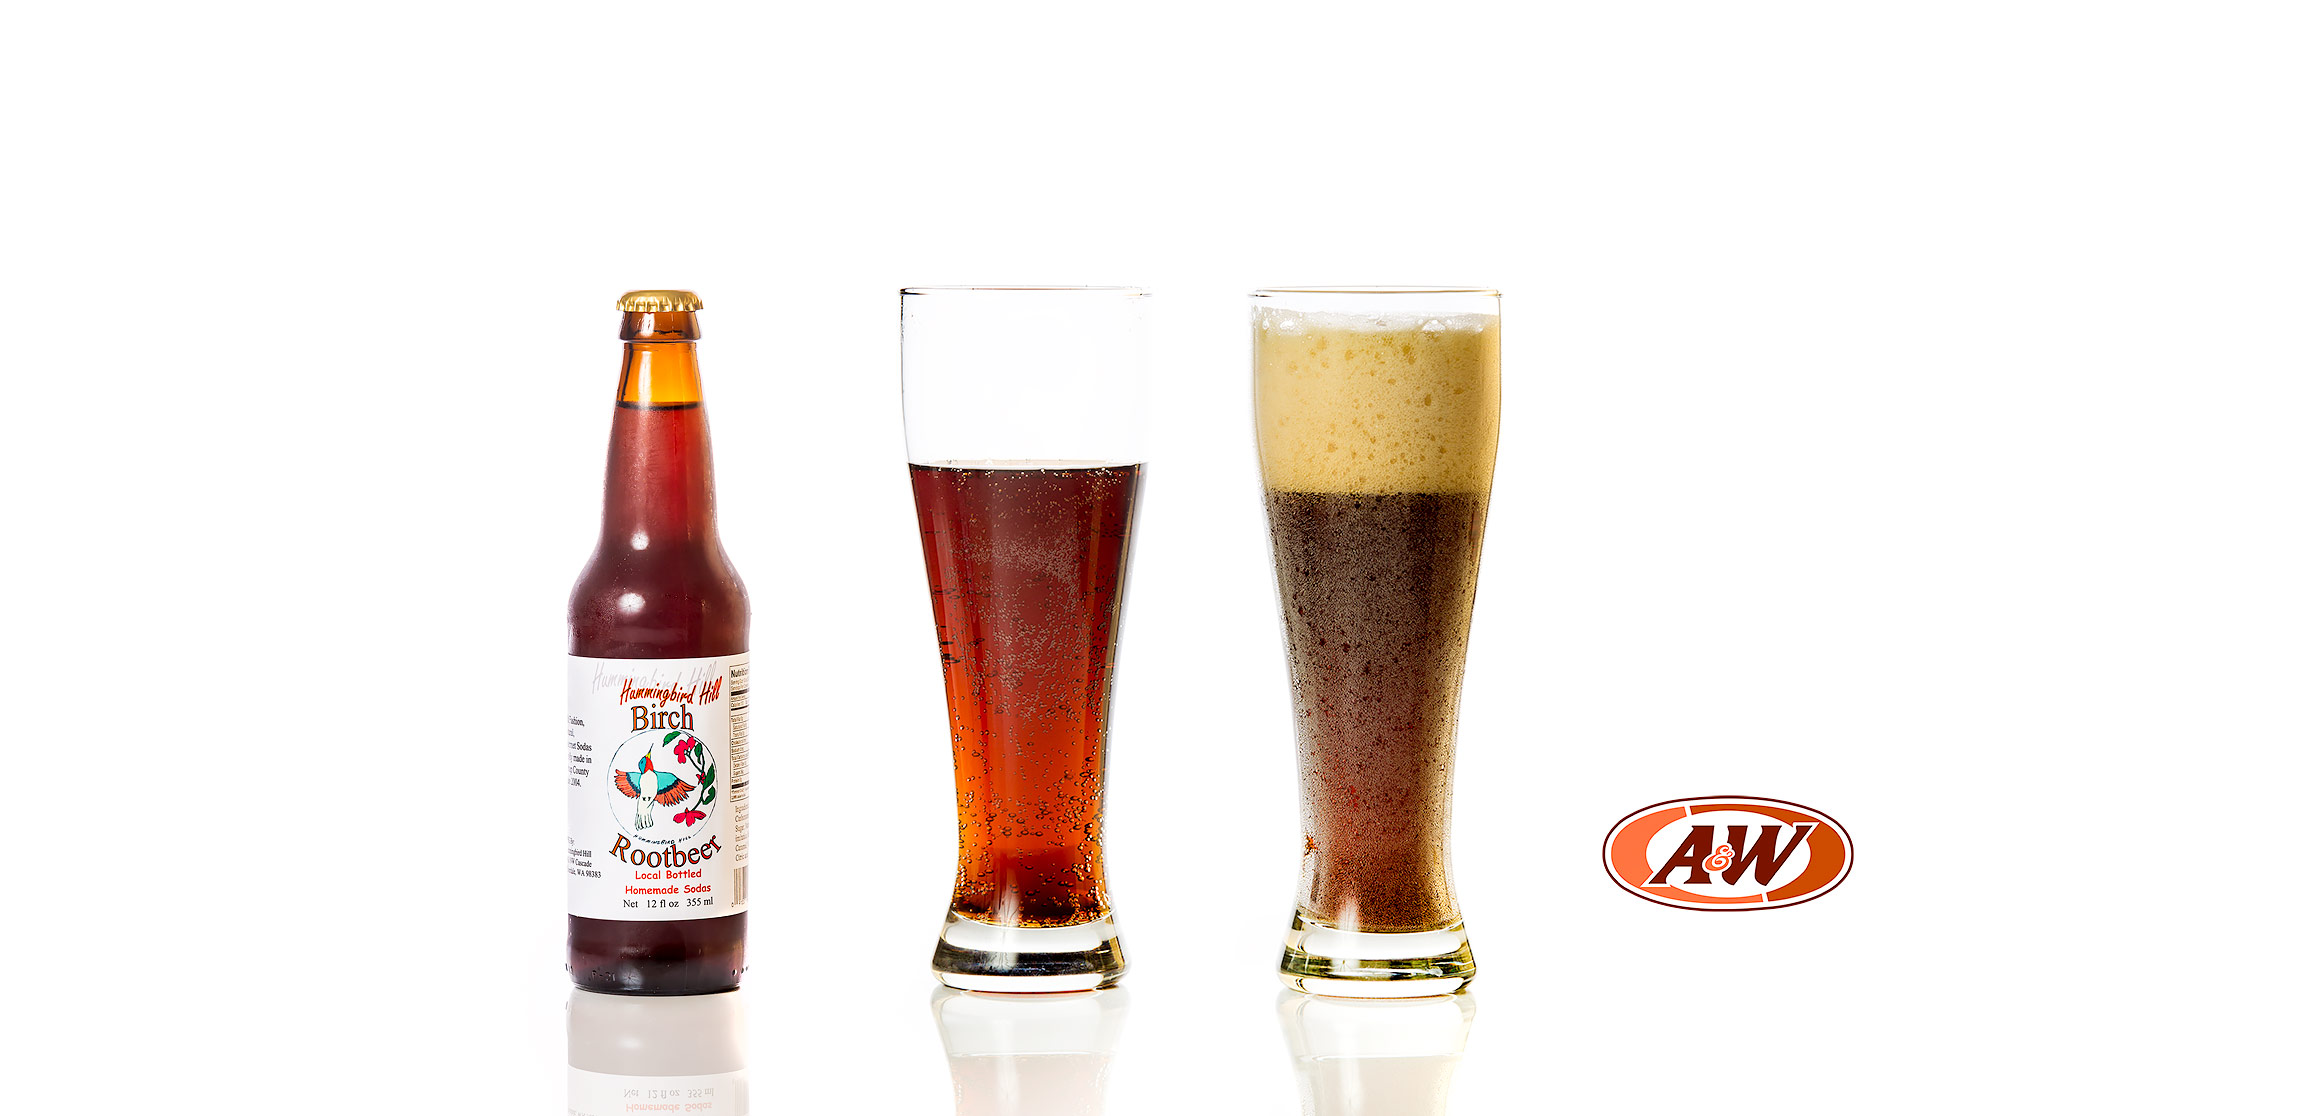 Hummingbird Hill Birch Root Beer compared to A&W